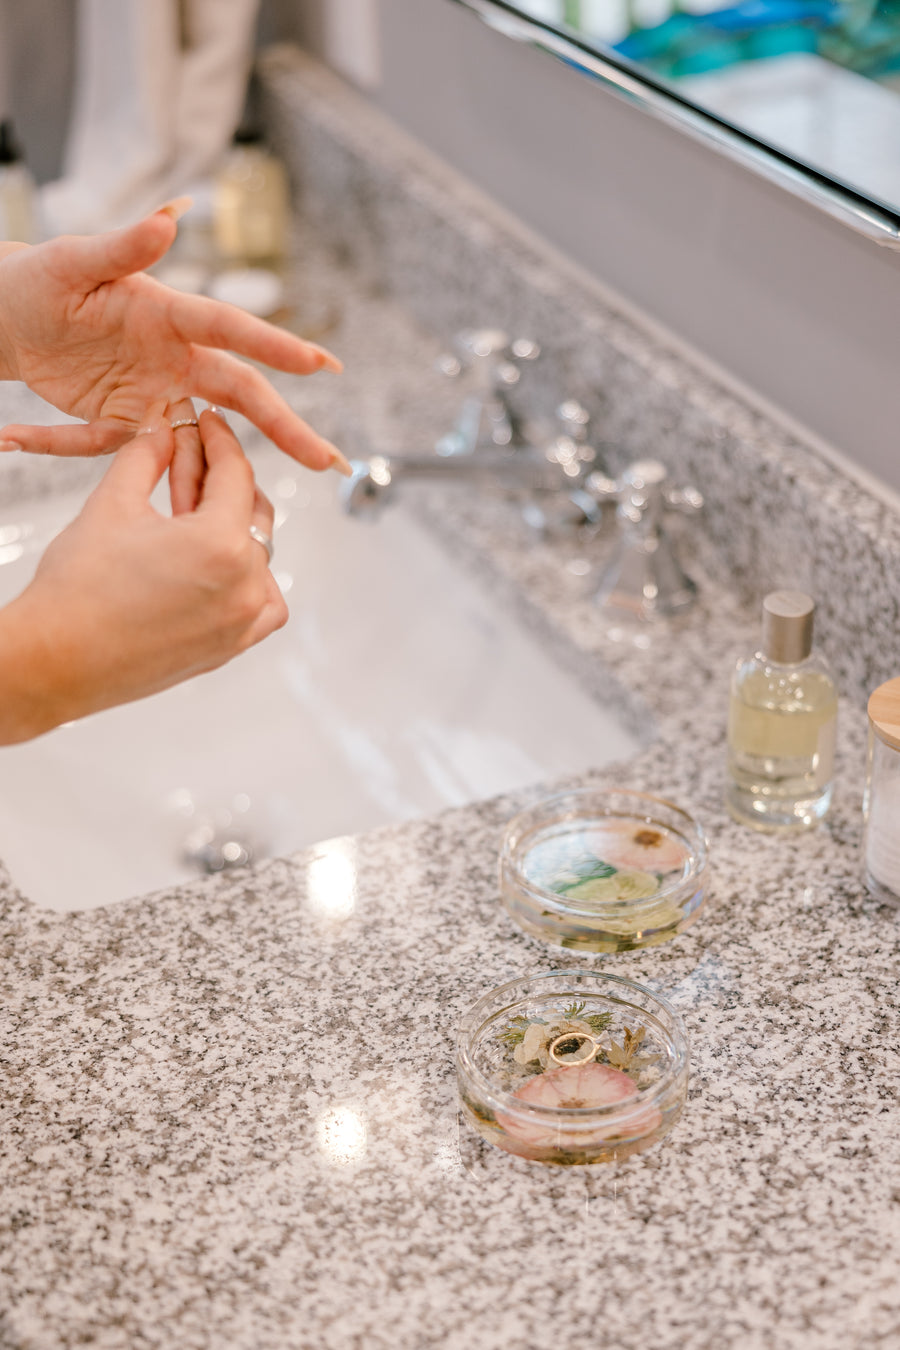 A woman removes her rings and sets them on top of a pressed flower coaster that sits beside her bathroom sink.